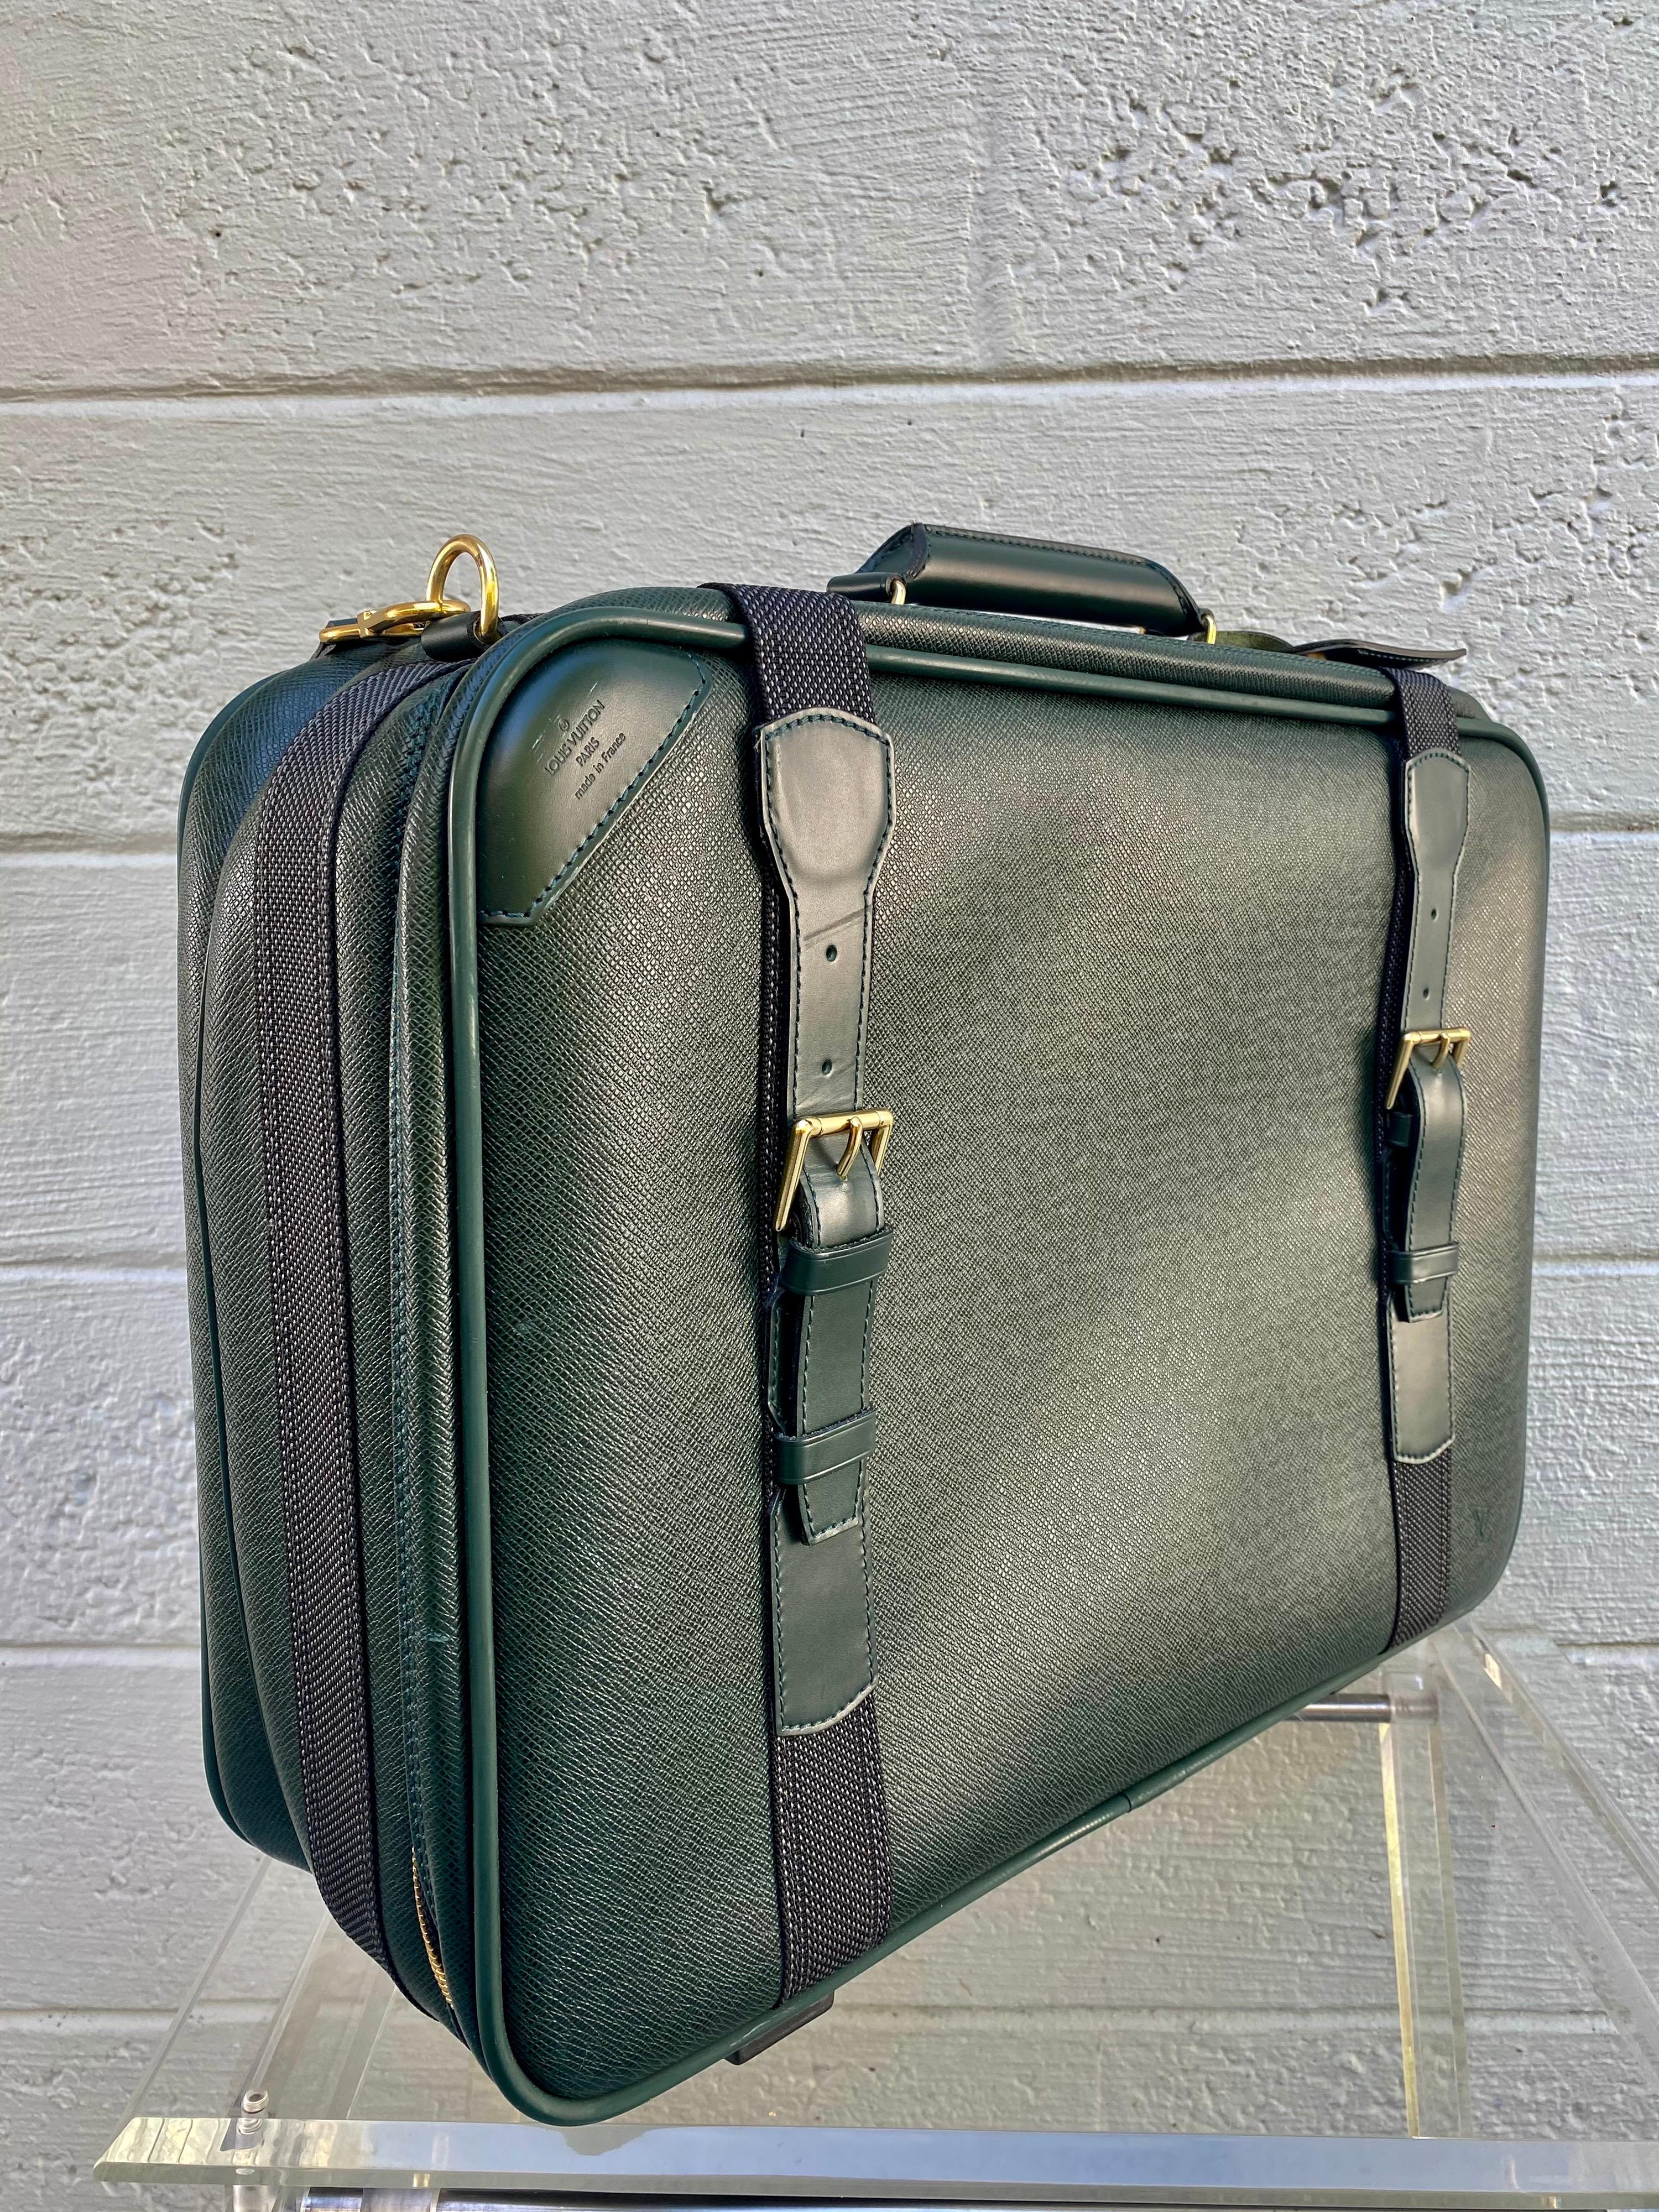 The vintage Louis Vuitton Satellite Taiga Leather carry on is crafted from hunter green leather, features a single rolled leather handle, cowhide leather trim, buckle straps and aged gold-tone hardware. Its two-way zip closure opens to a gray